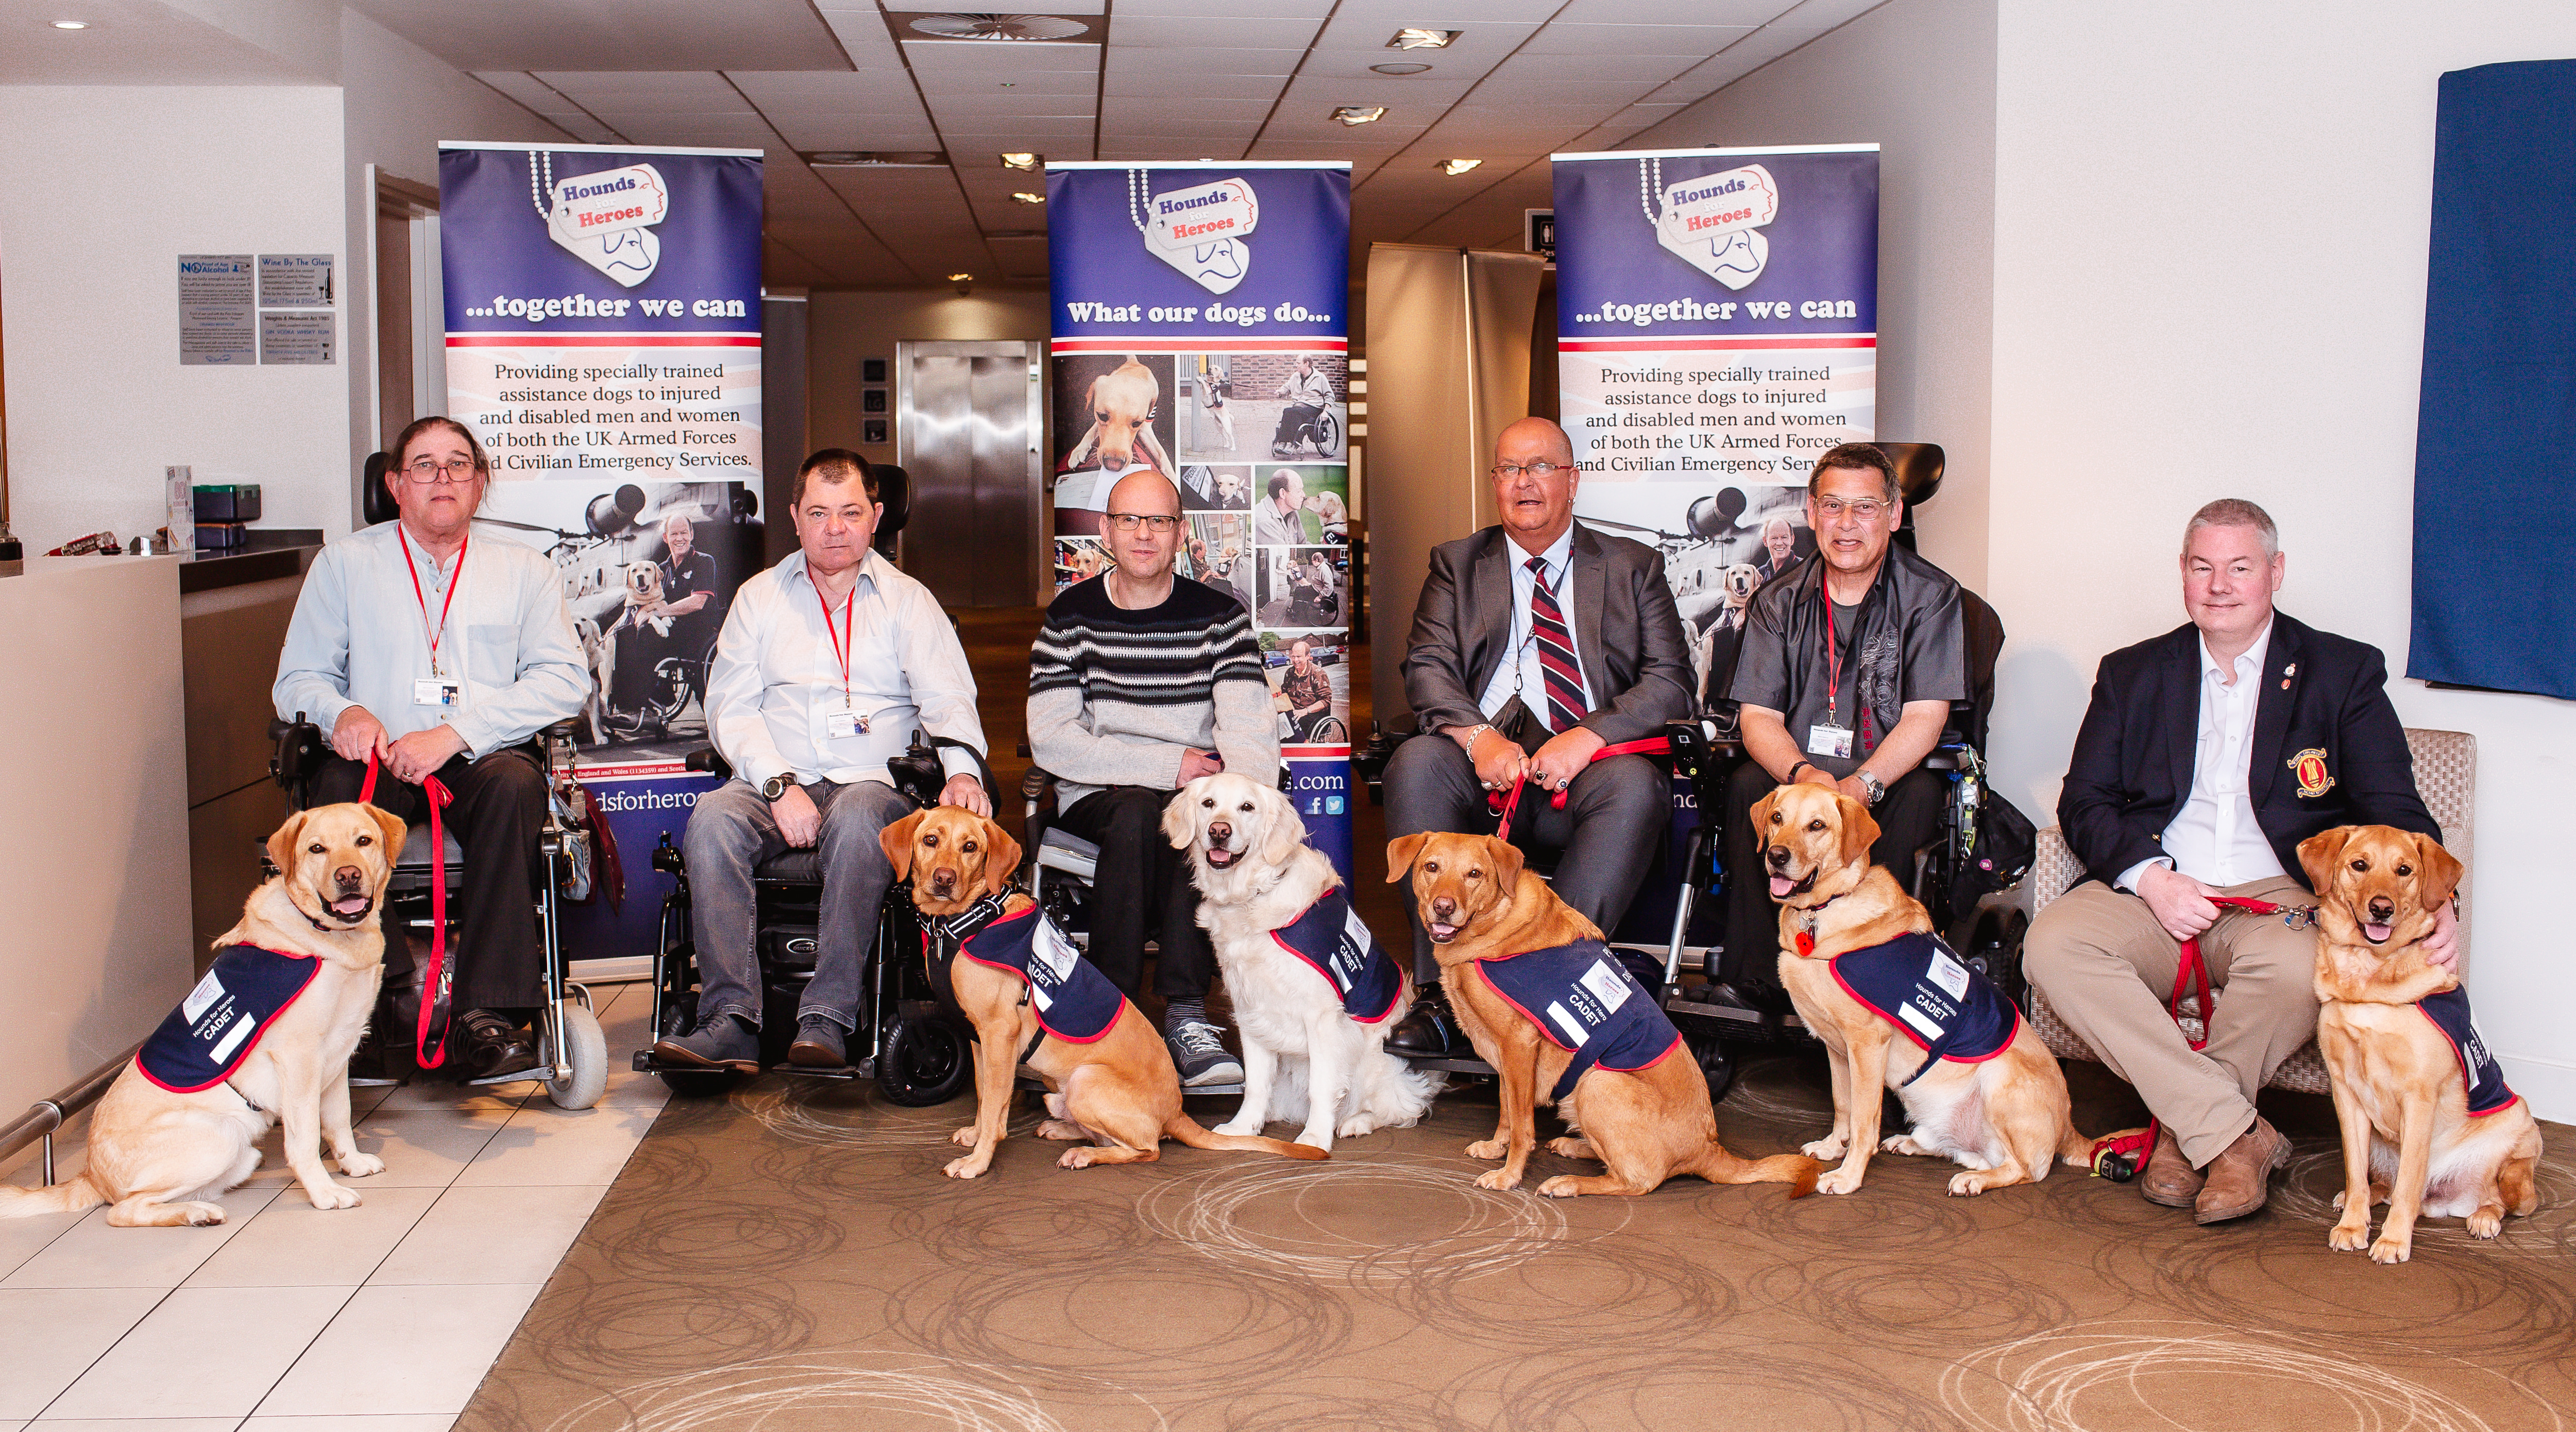 6 of our partners with their assistance dogs